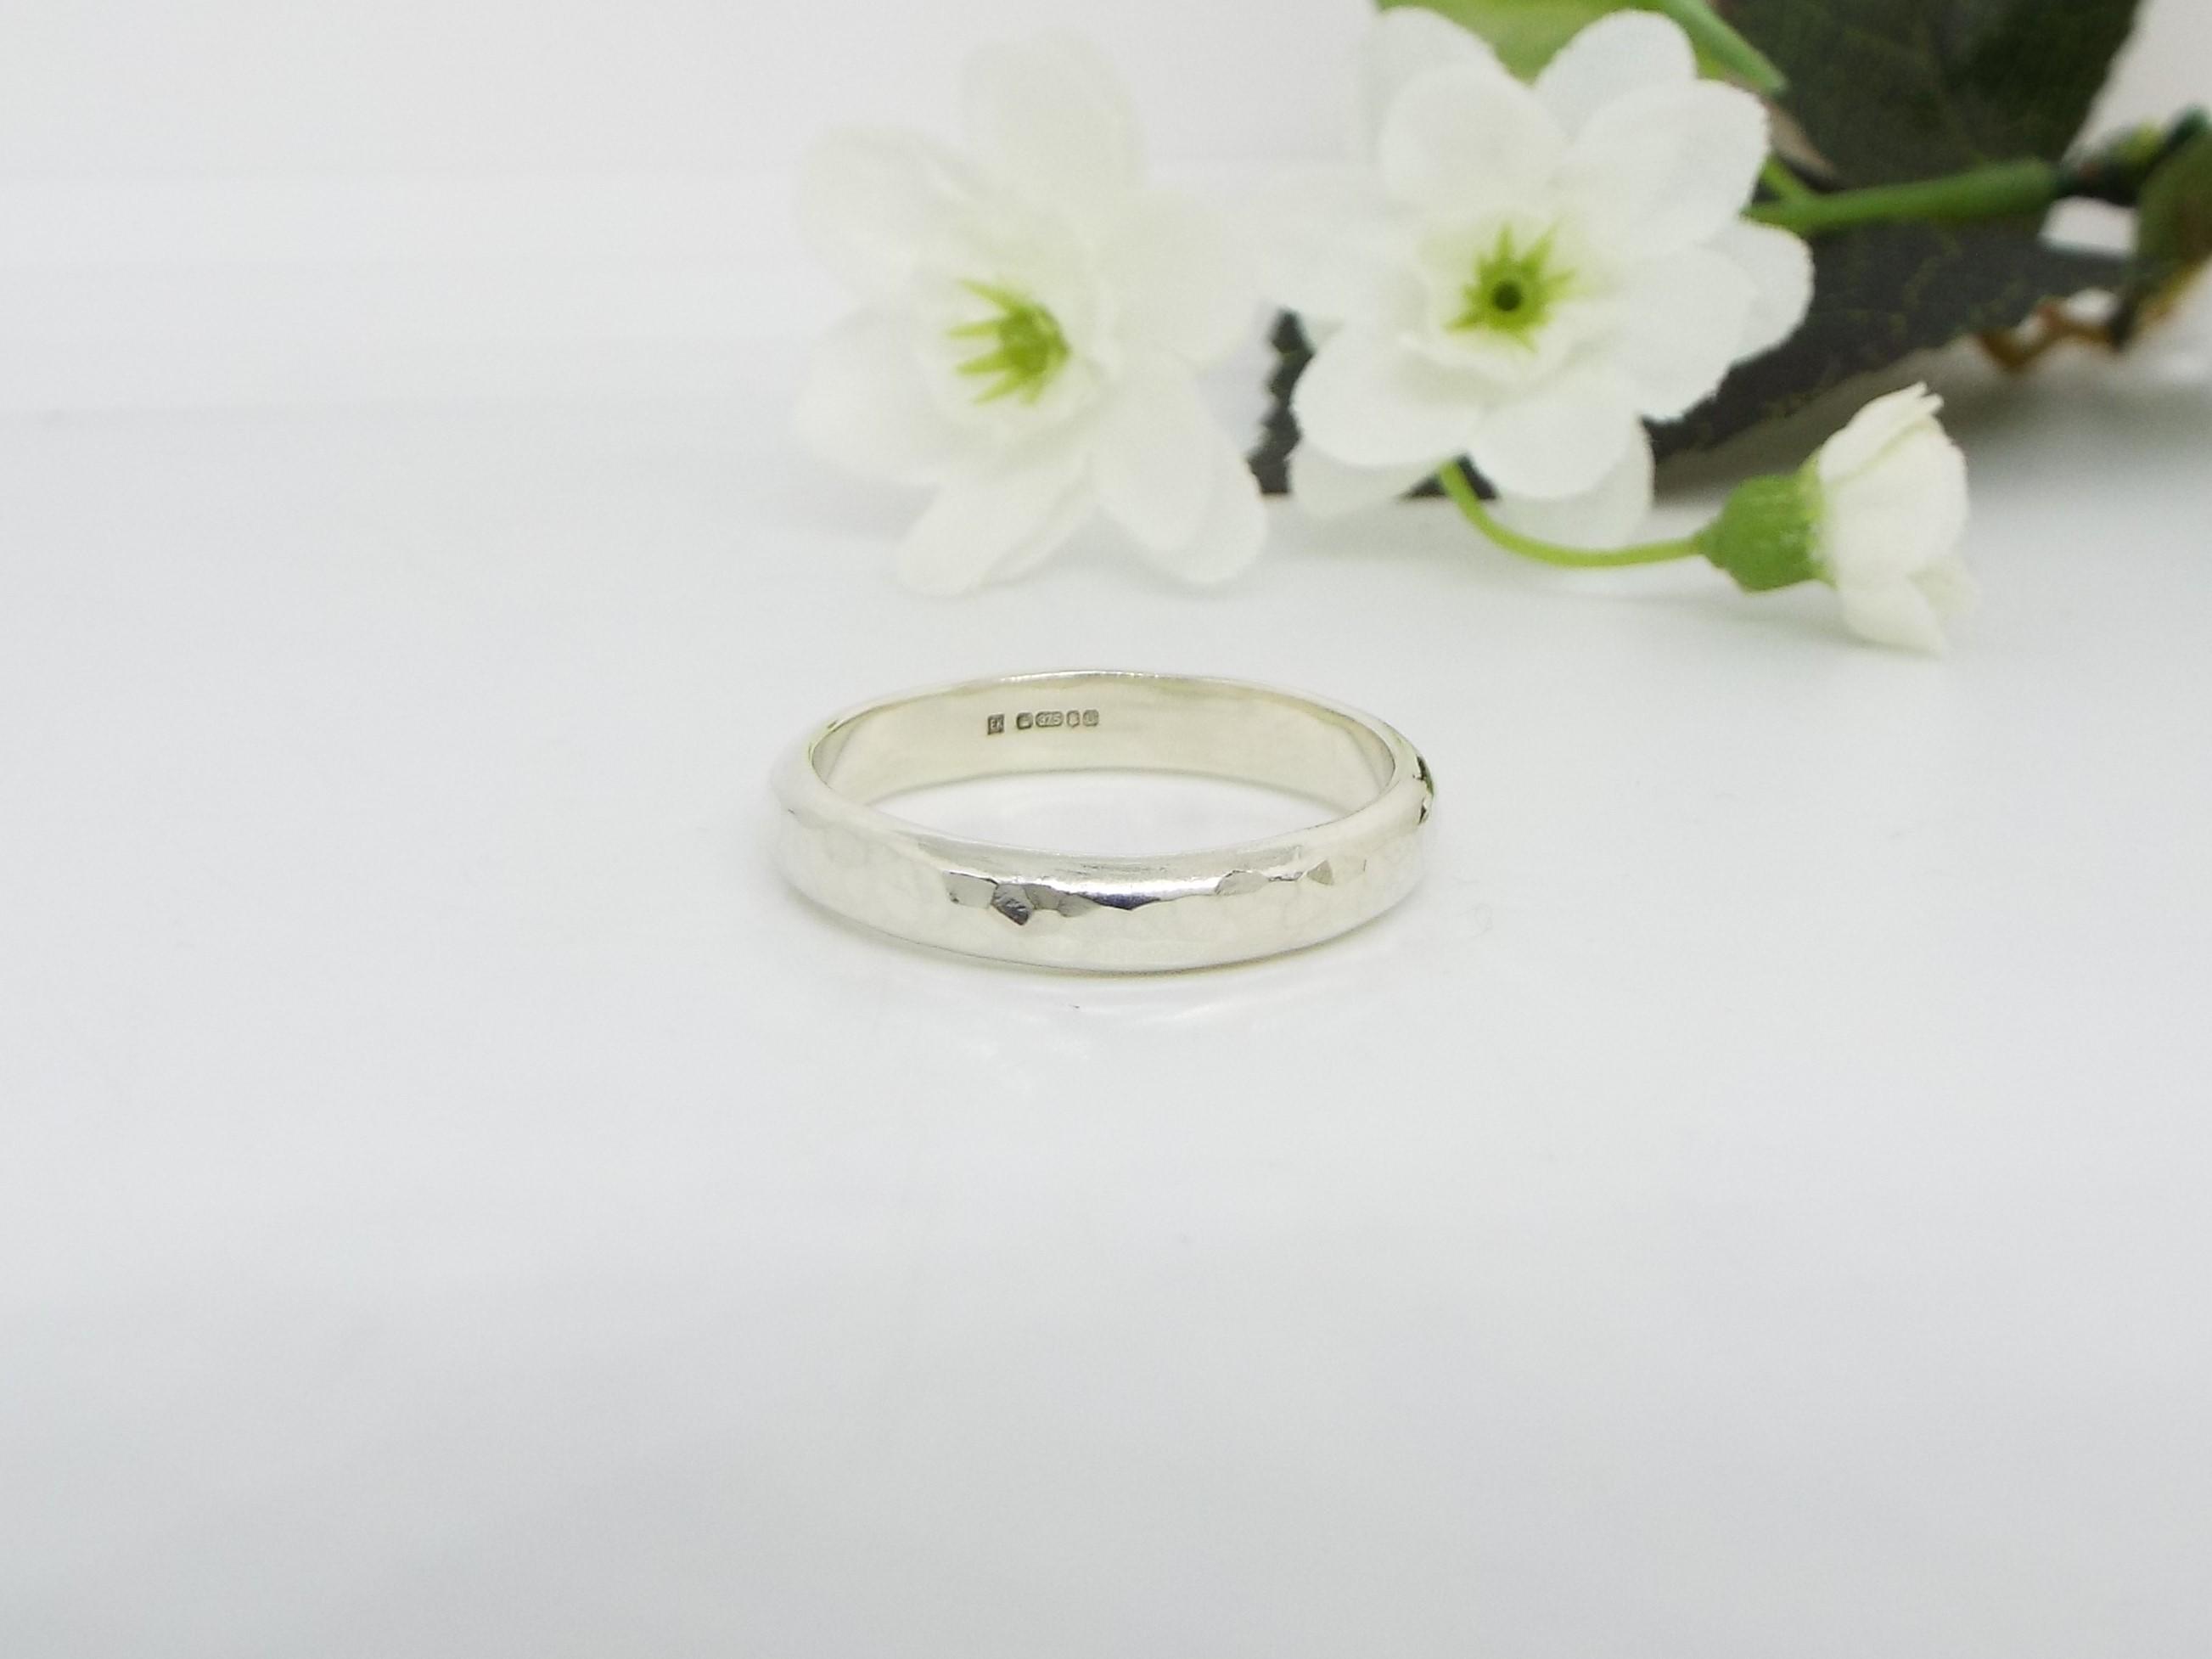 wide 9ct white gold wedding ring